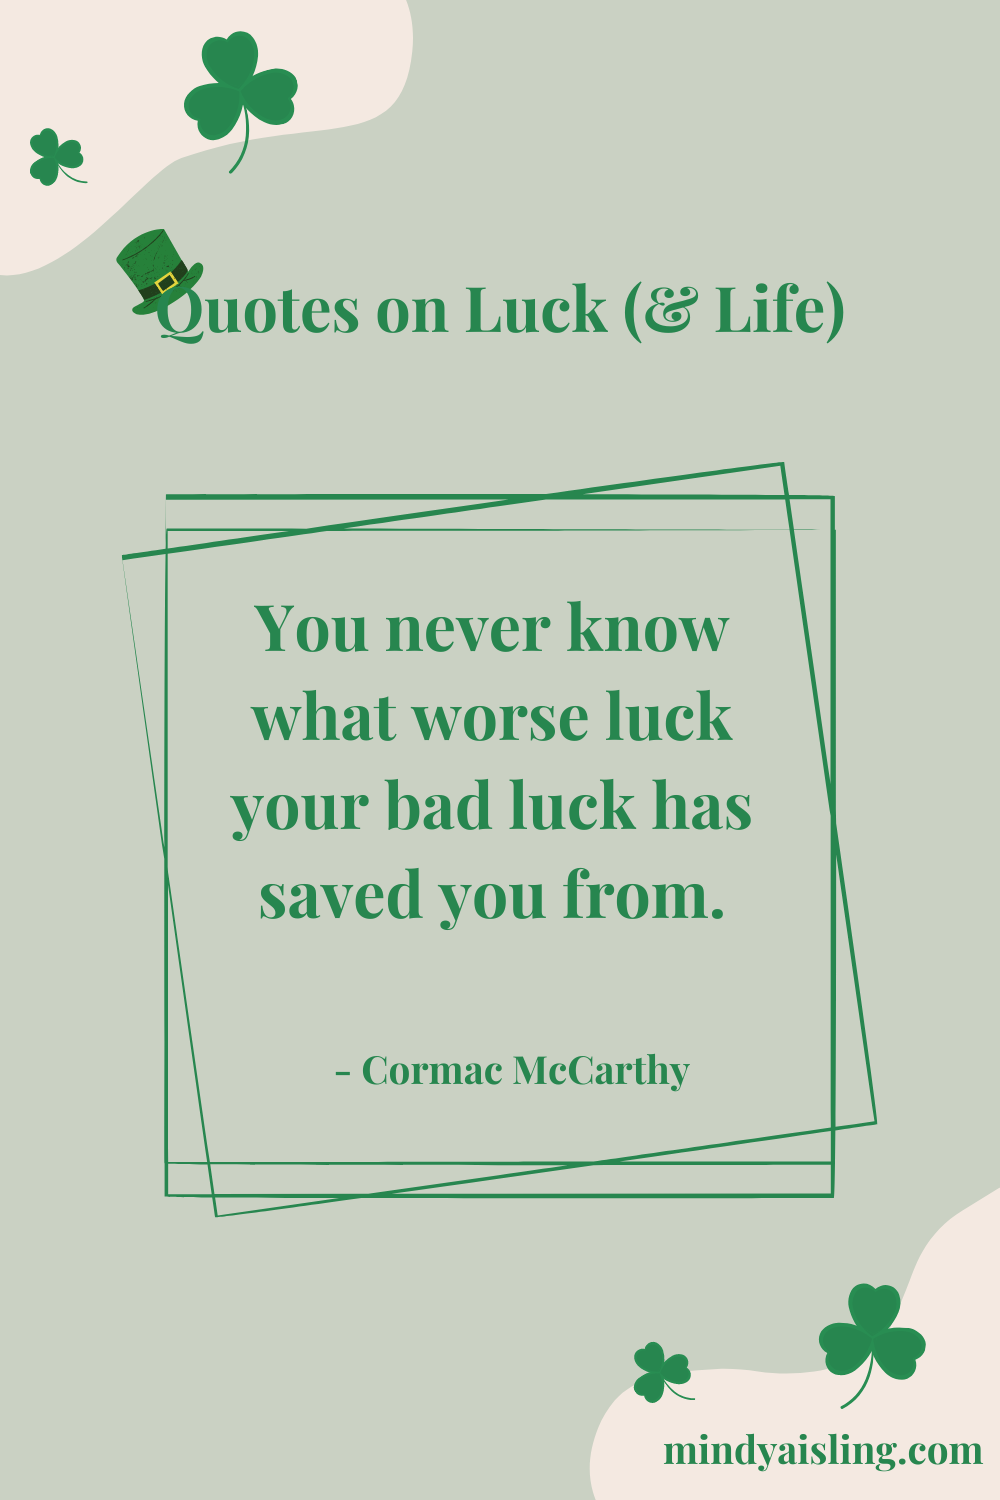 Quotes on Luck, Mindy Amita Aisling